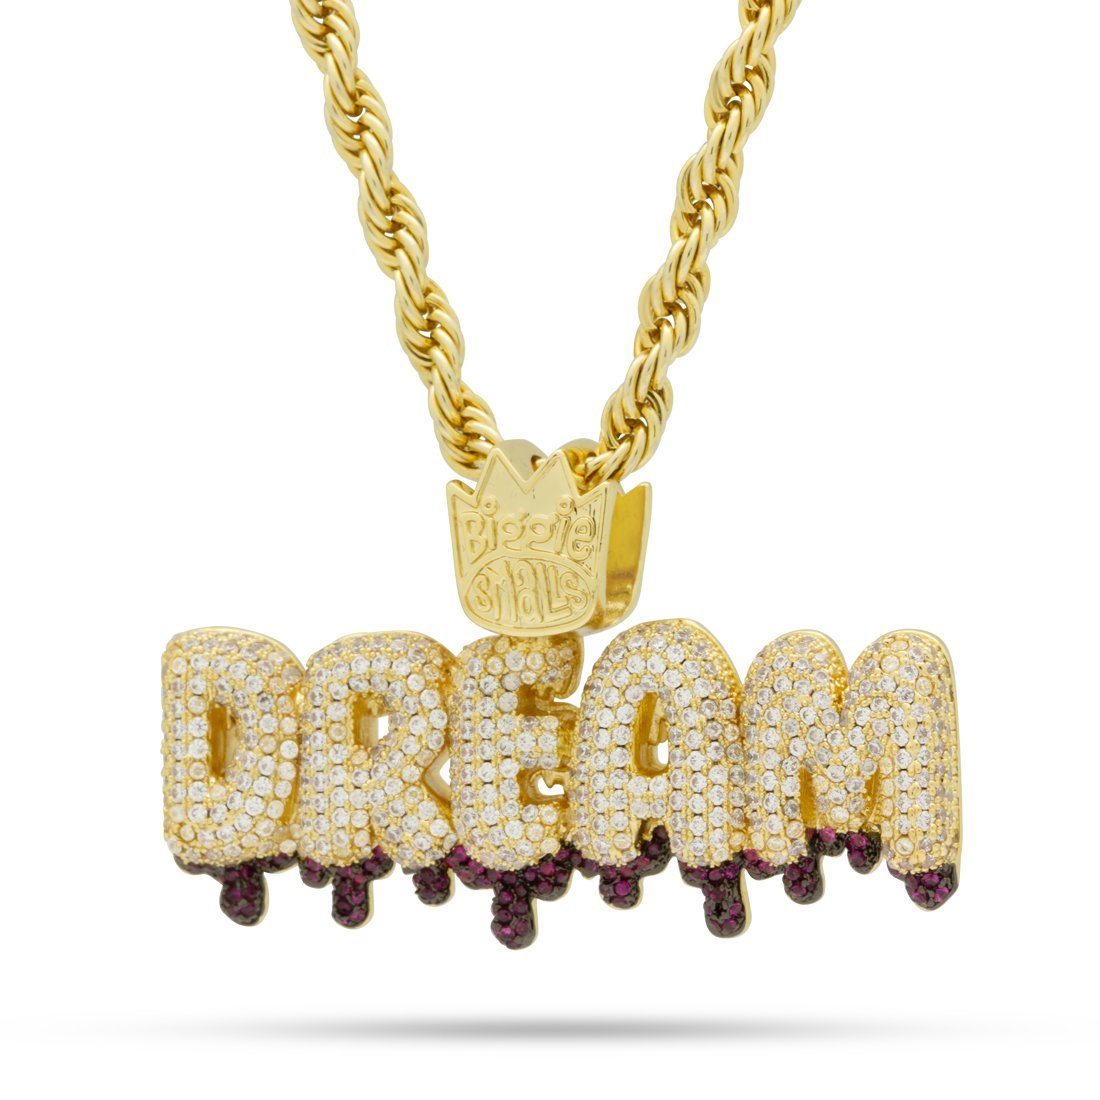 Image of Notorious B.I.G. x King Ice - The Dream Necklace